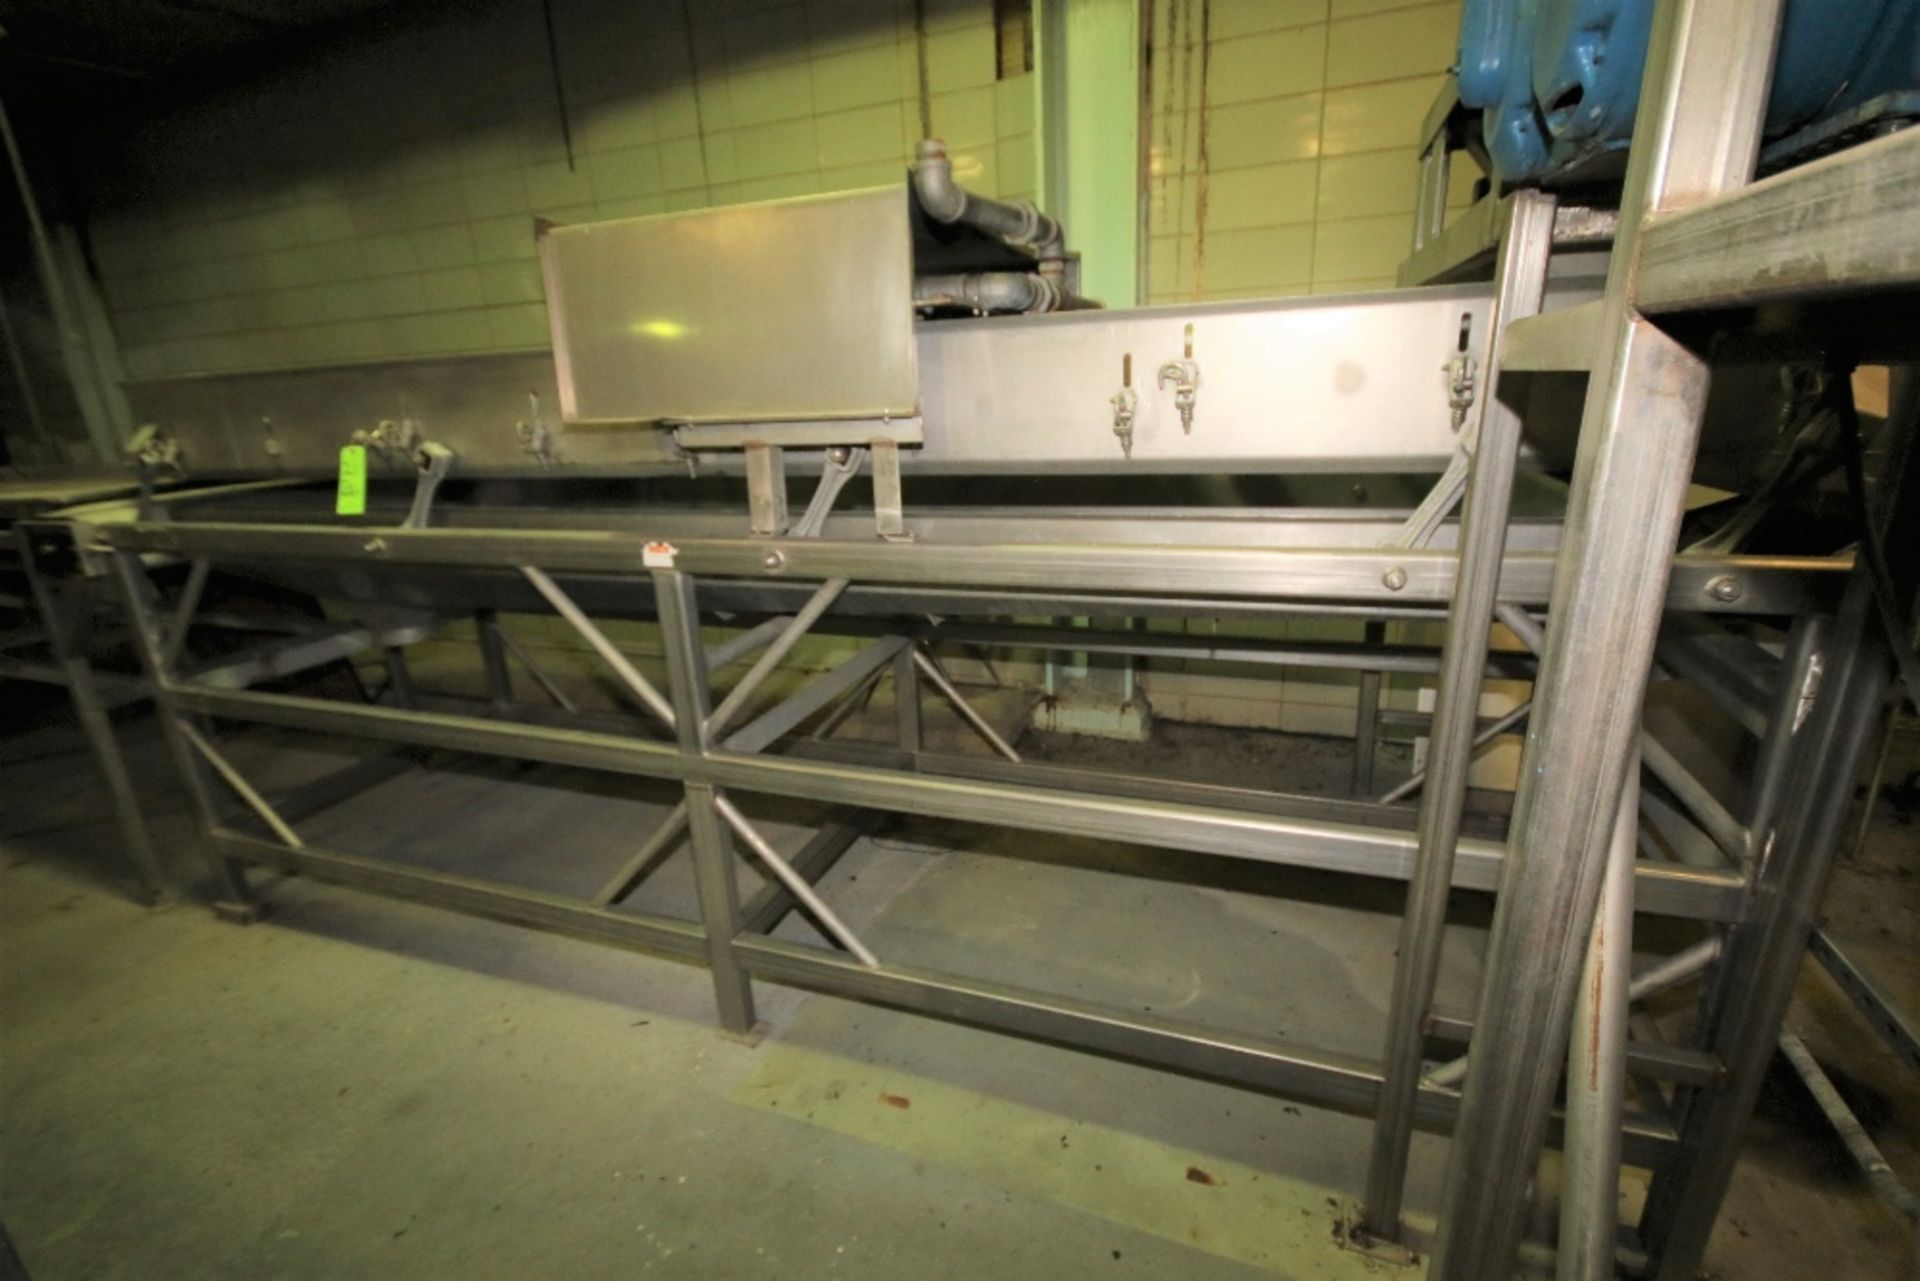 Key ~14 ft. L x 36" W S/S Vibratory Dewatering / Fines Removal / Shaker Conveyor with Electric - Image 4 of 7